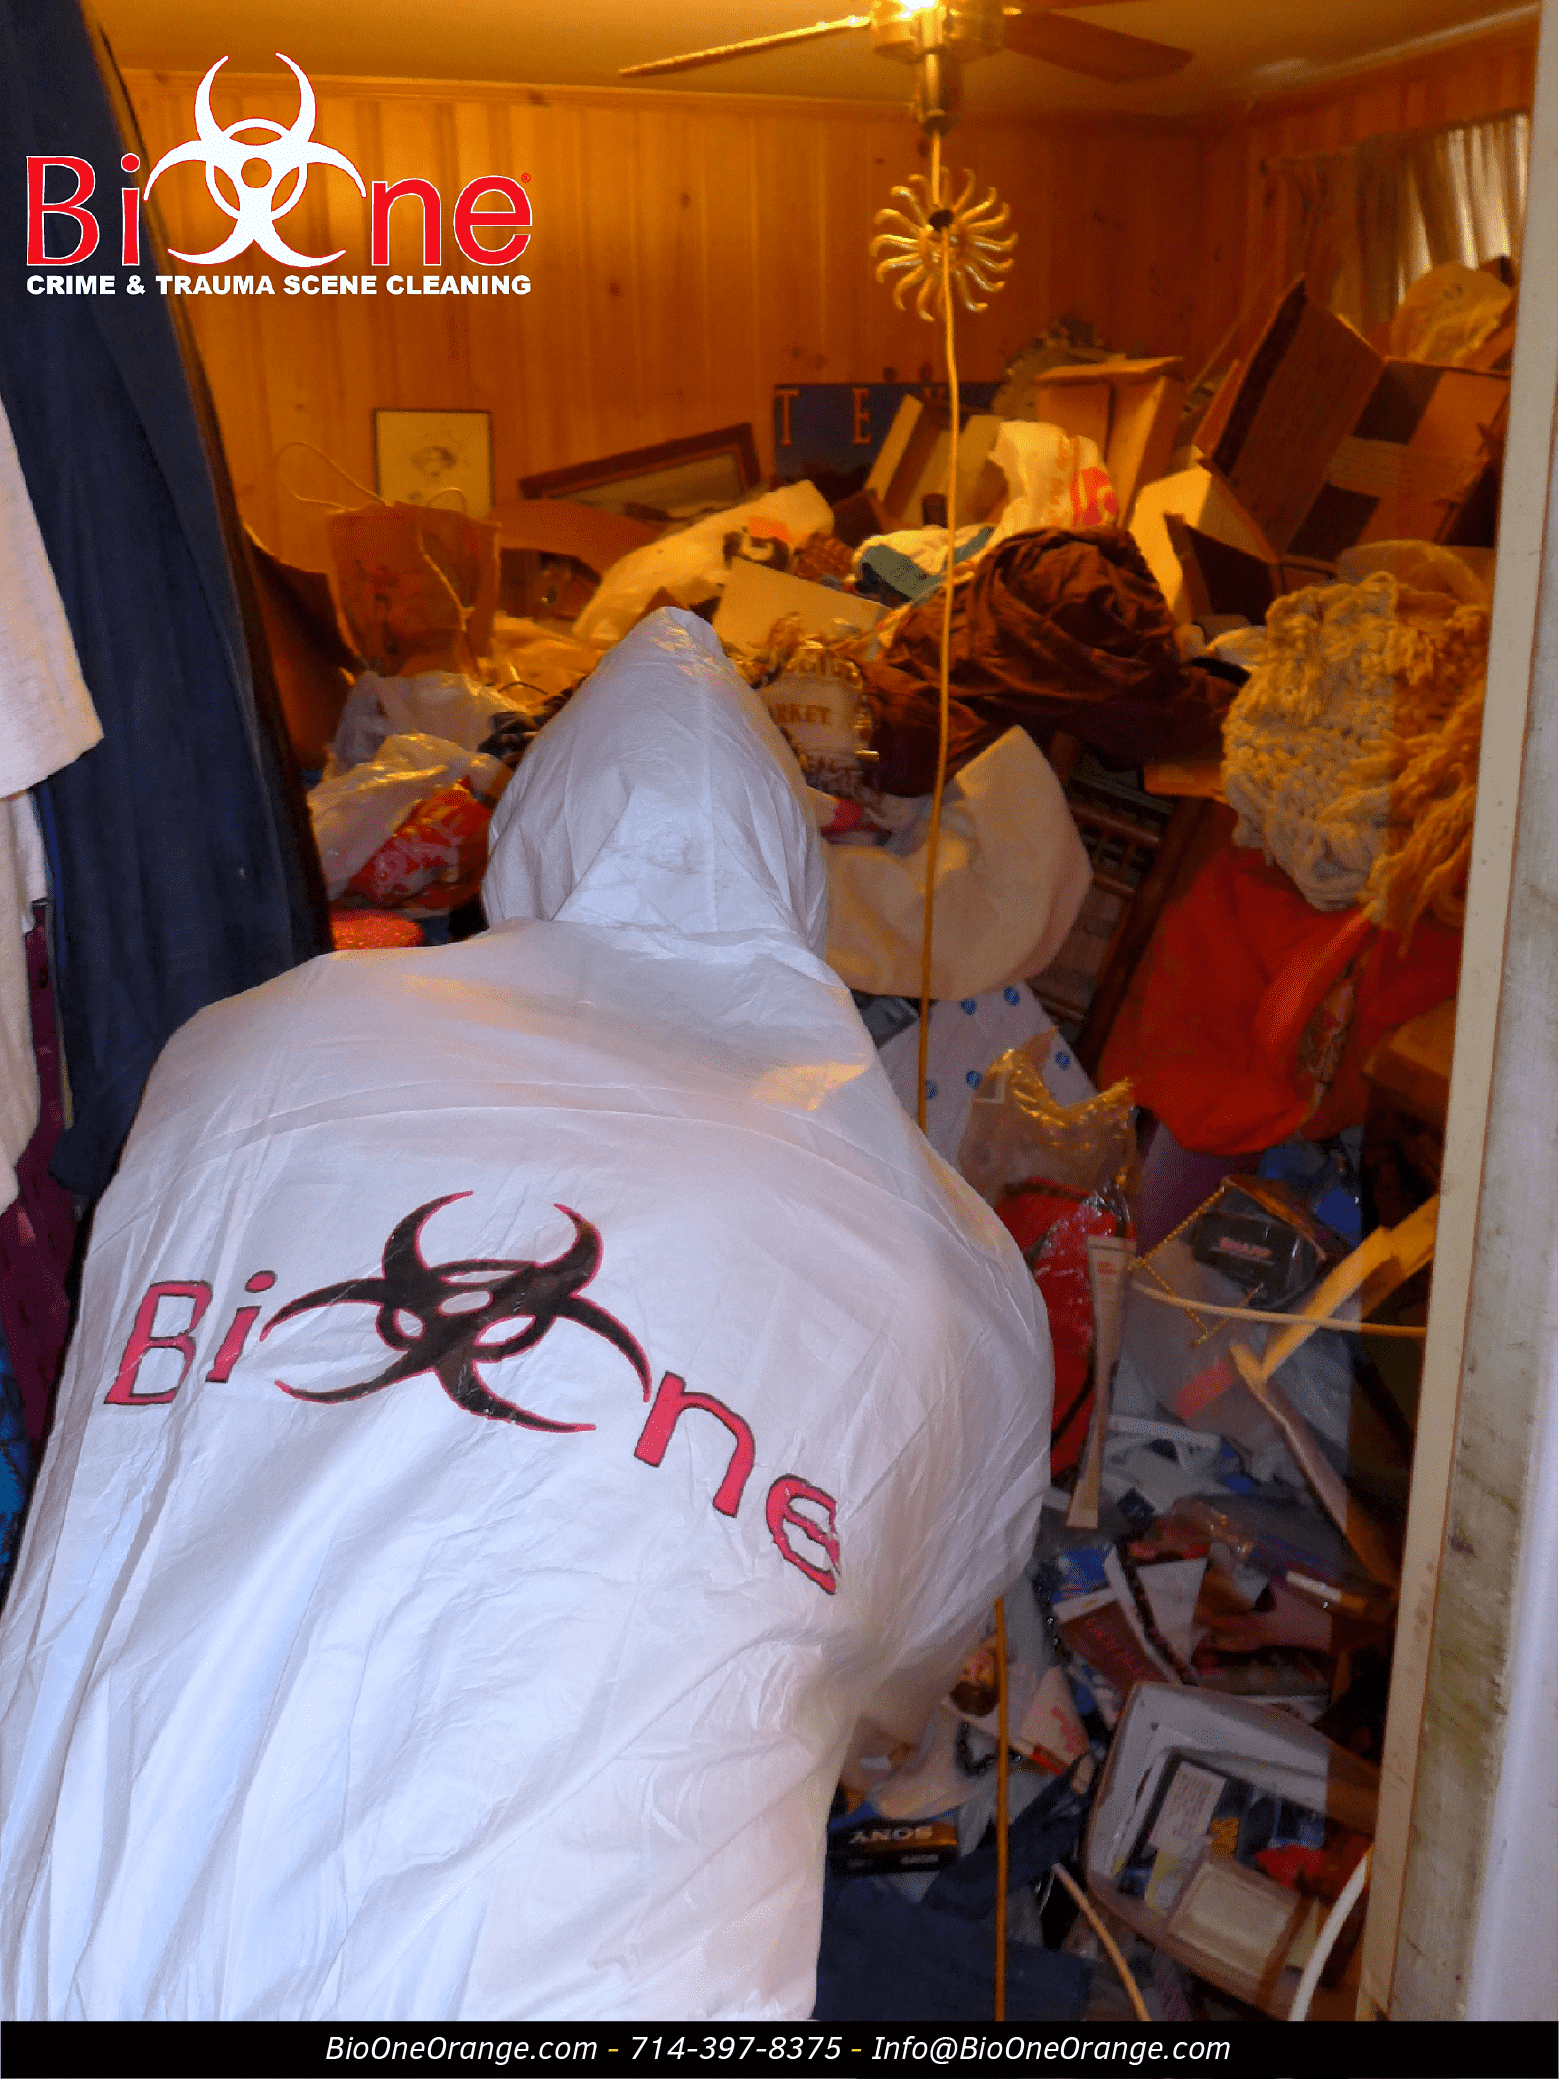 Image shows Bio-One of Orange technician entering a severely cluttered property.